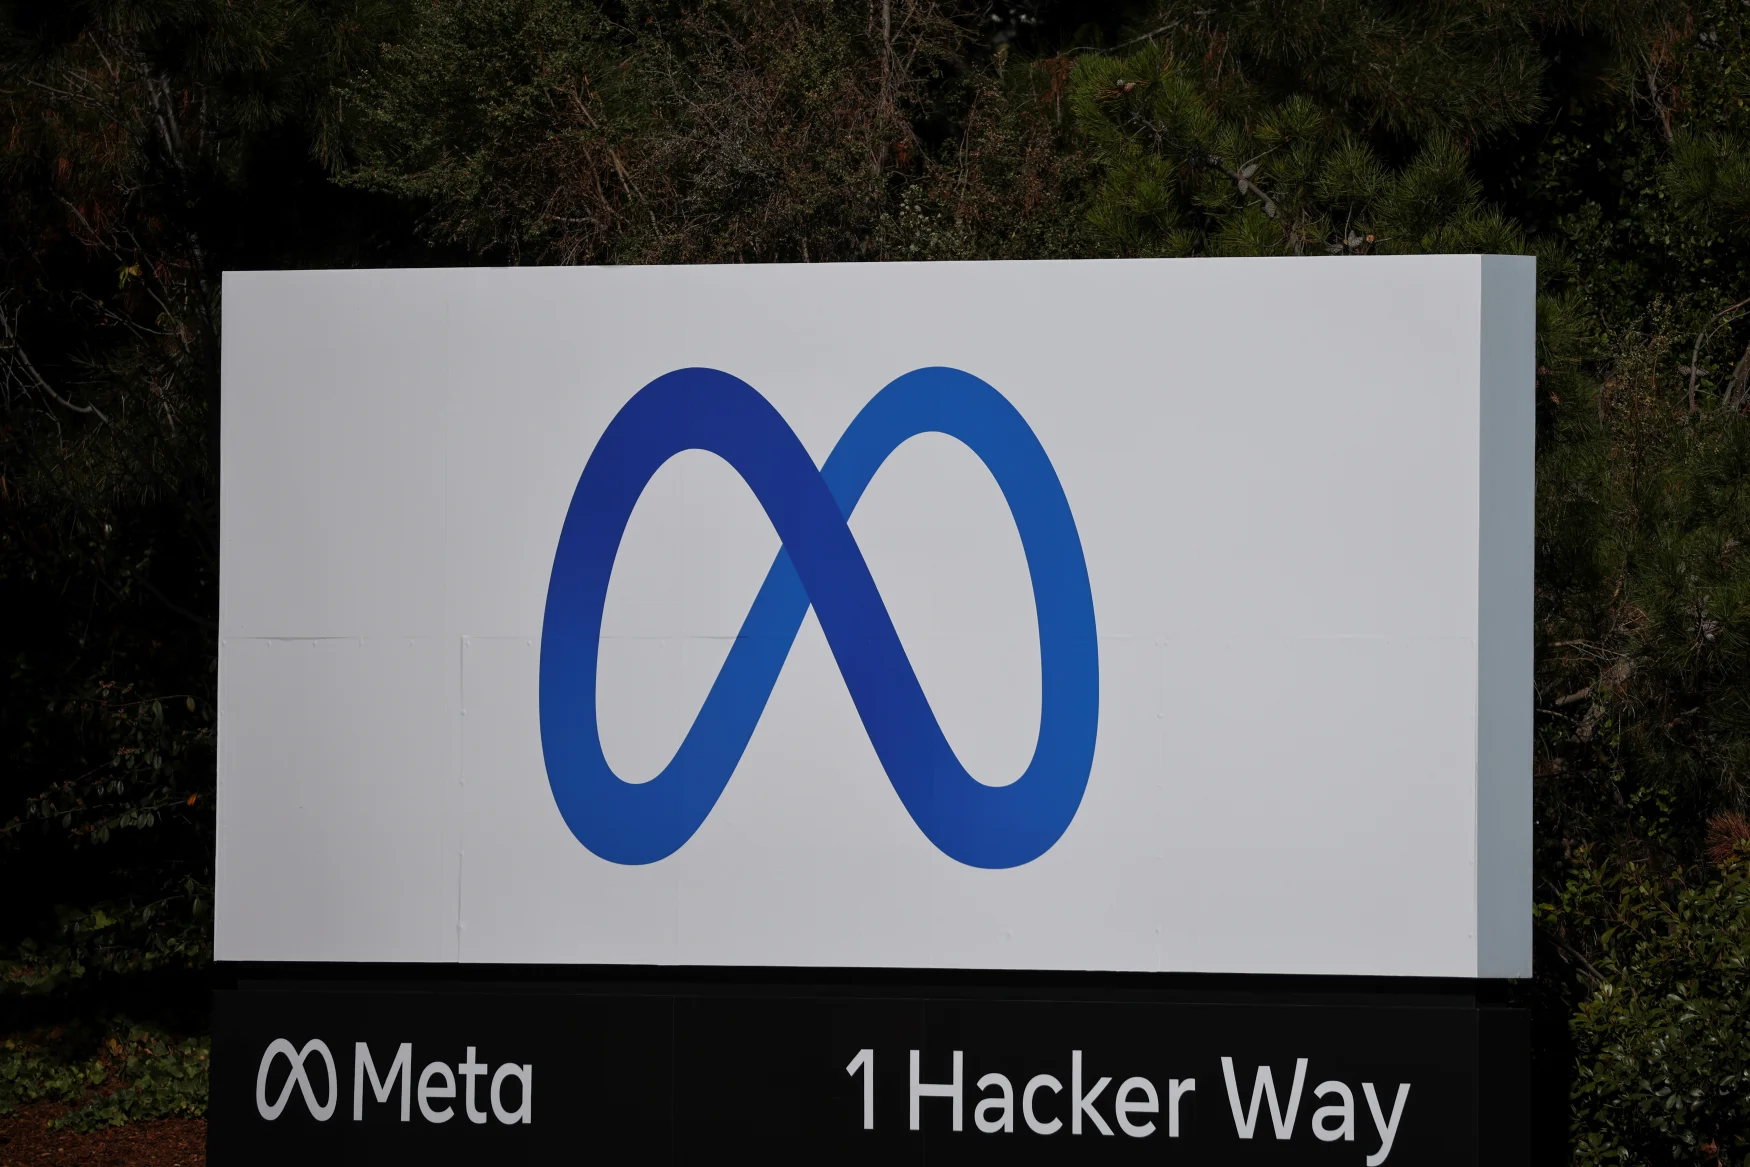 A sign of Meta, the new name for the company formerly known as Facebook, is seen at its headquarters in Menlo Park, California, U.S. October 28, 2021. REUTERS/Carlos Barria